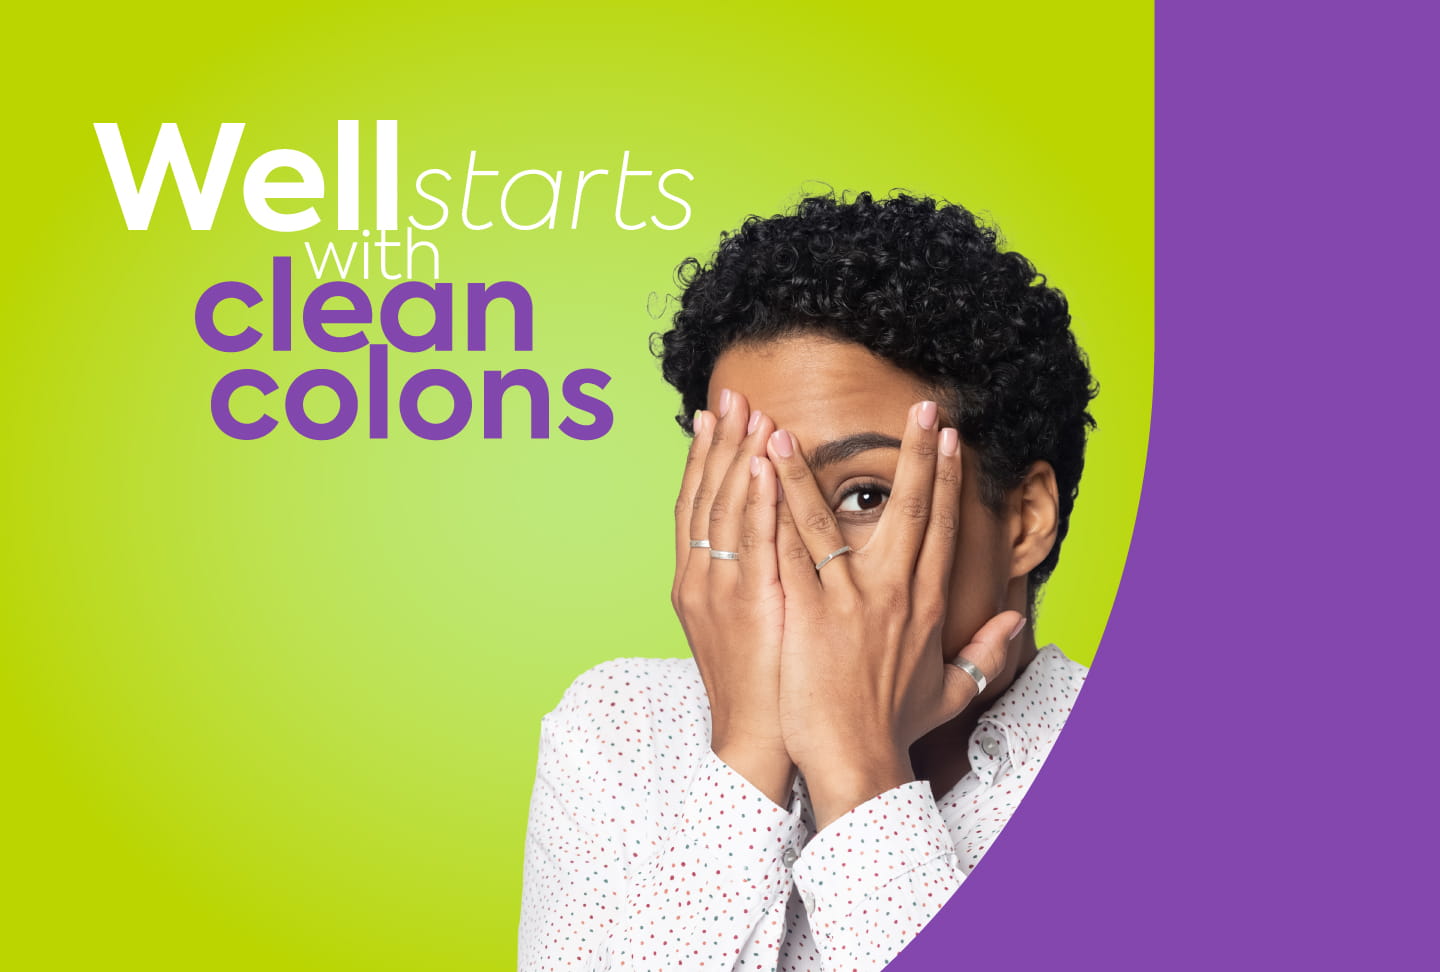 Well starts with clean colons